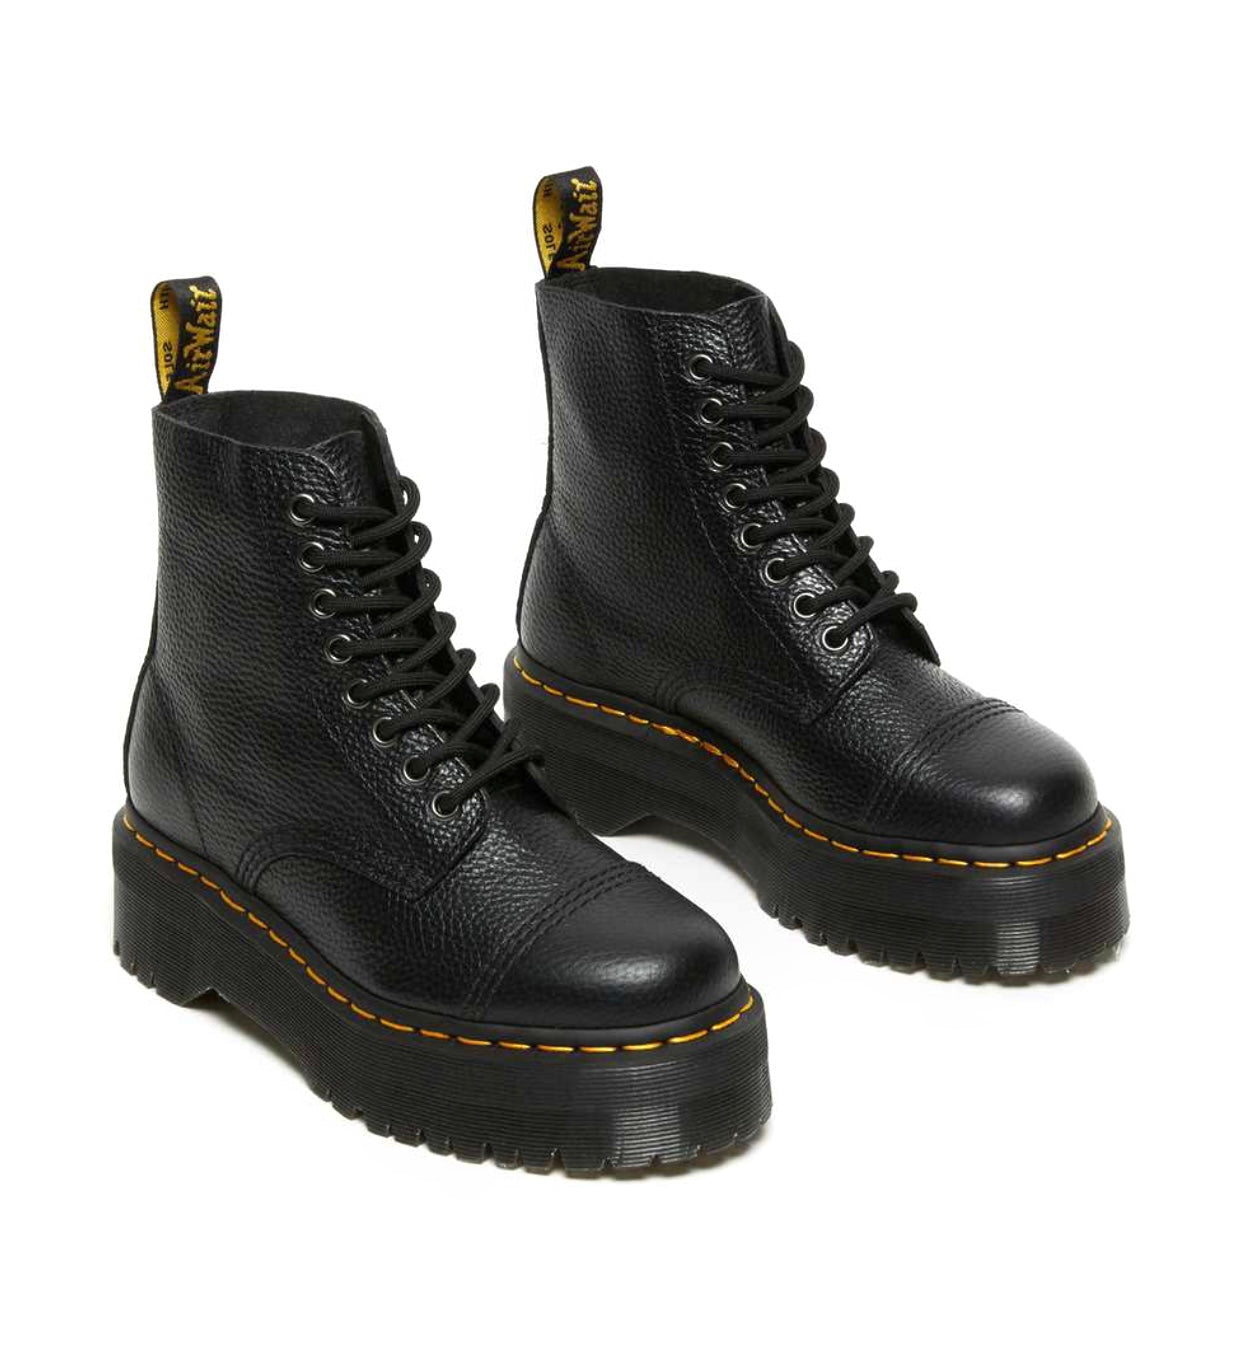 Dr. Martens Sinclair Black Milled Nappa Zip Ankle 8 Eyelet Boot